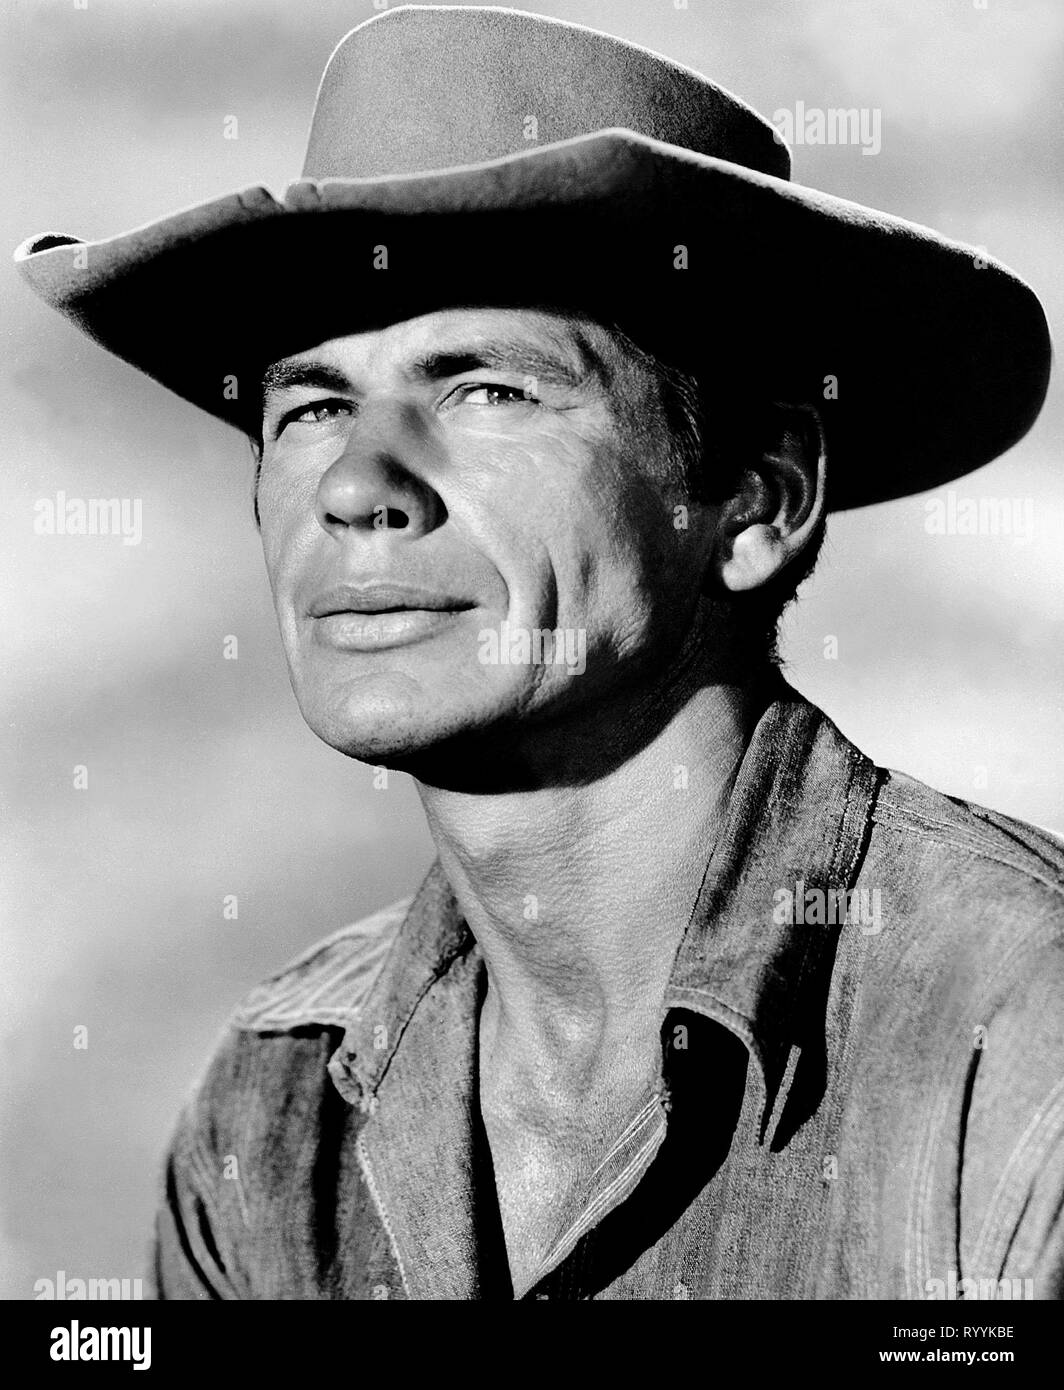 CHARLES BRONSON, The Magnificent Seven, 1960 Banque D'Images